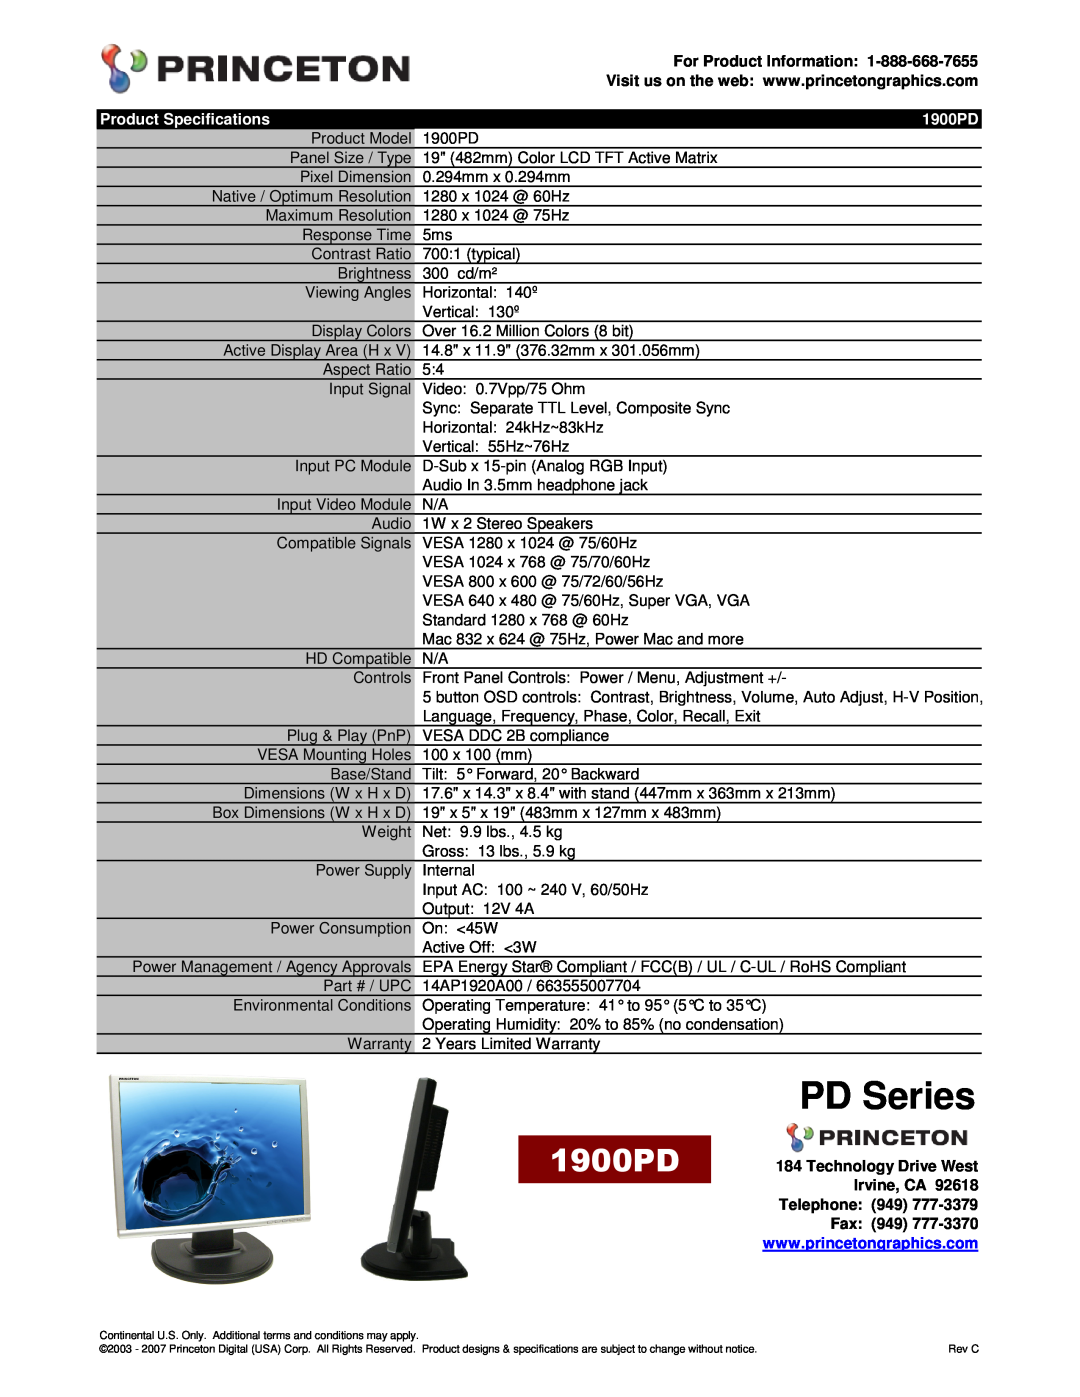 Princeton specifications PD Series, For Product Information, Product Specifications, 1900PD 